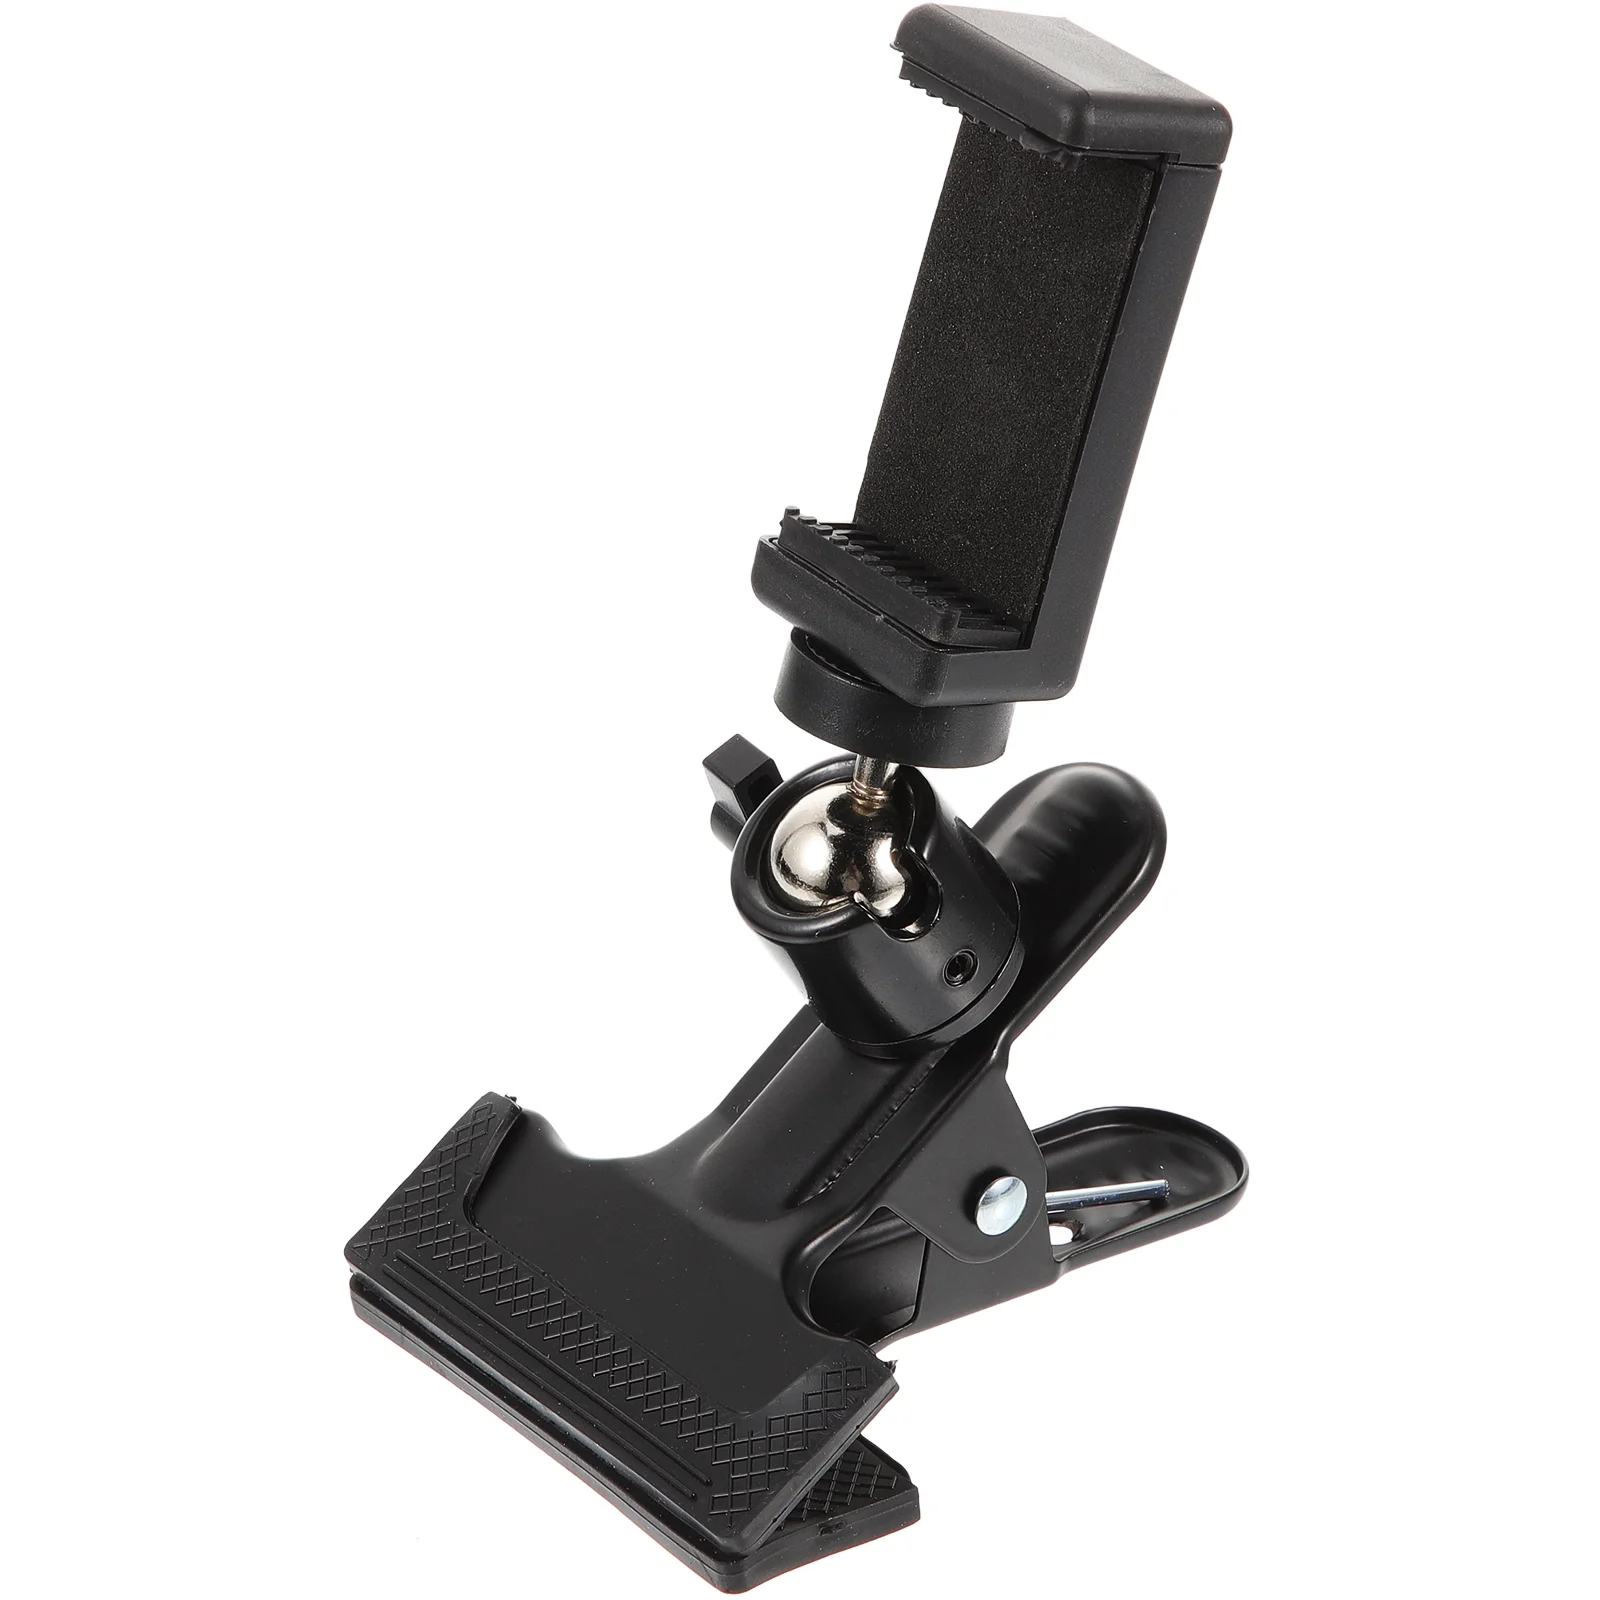 Bass Broadcast Clip Rotating Stand Guitar Bracket Instrument Part Mobile Holder Accessories Head Live enlarge